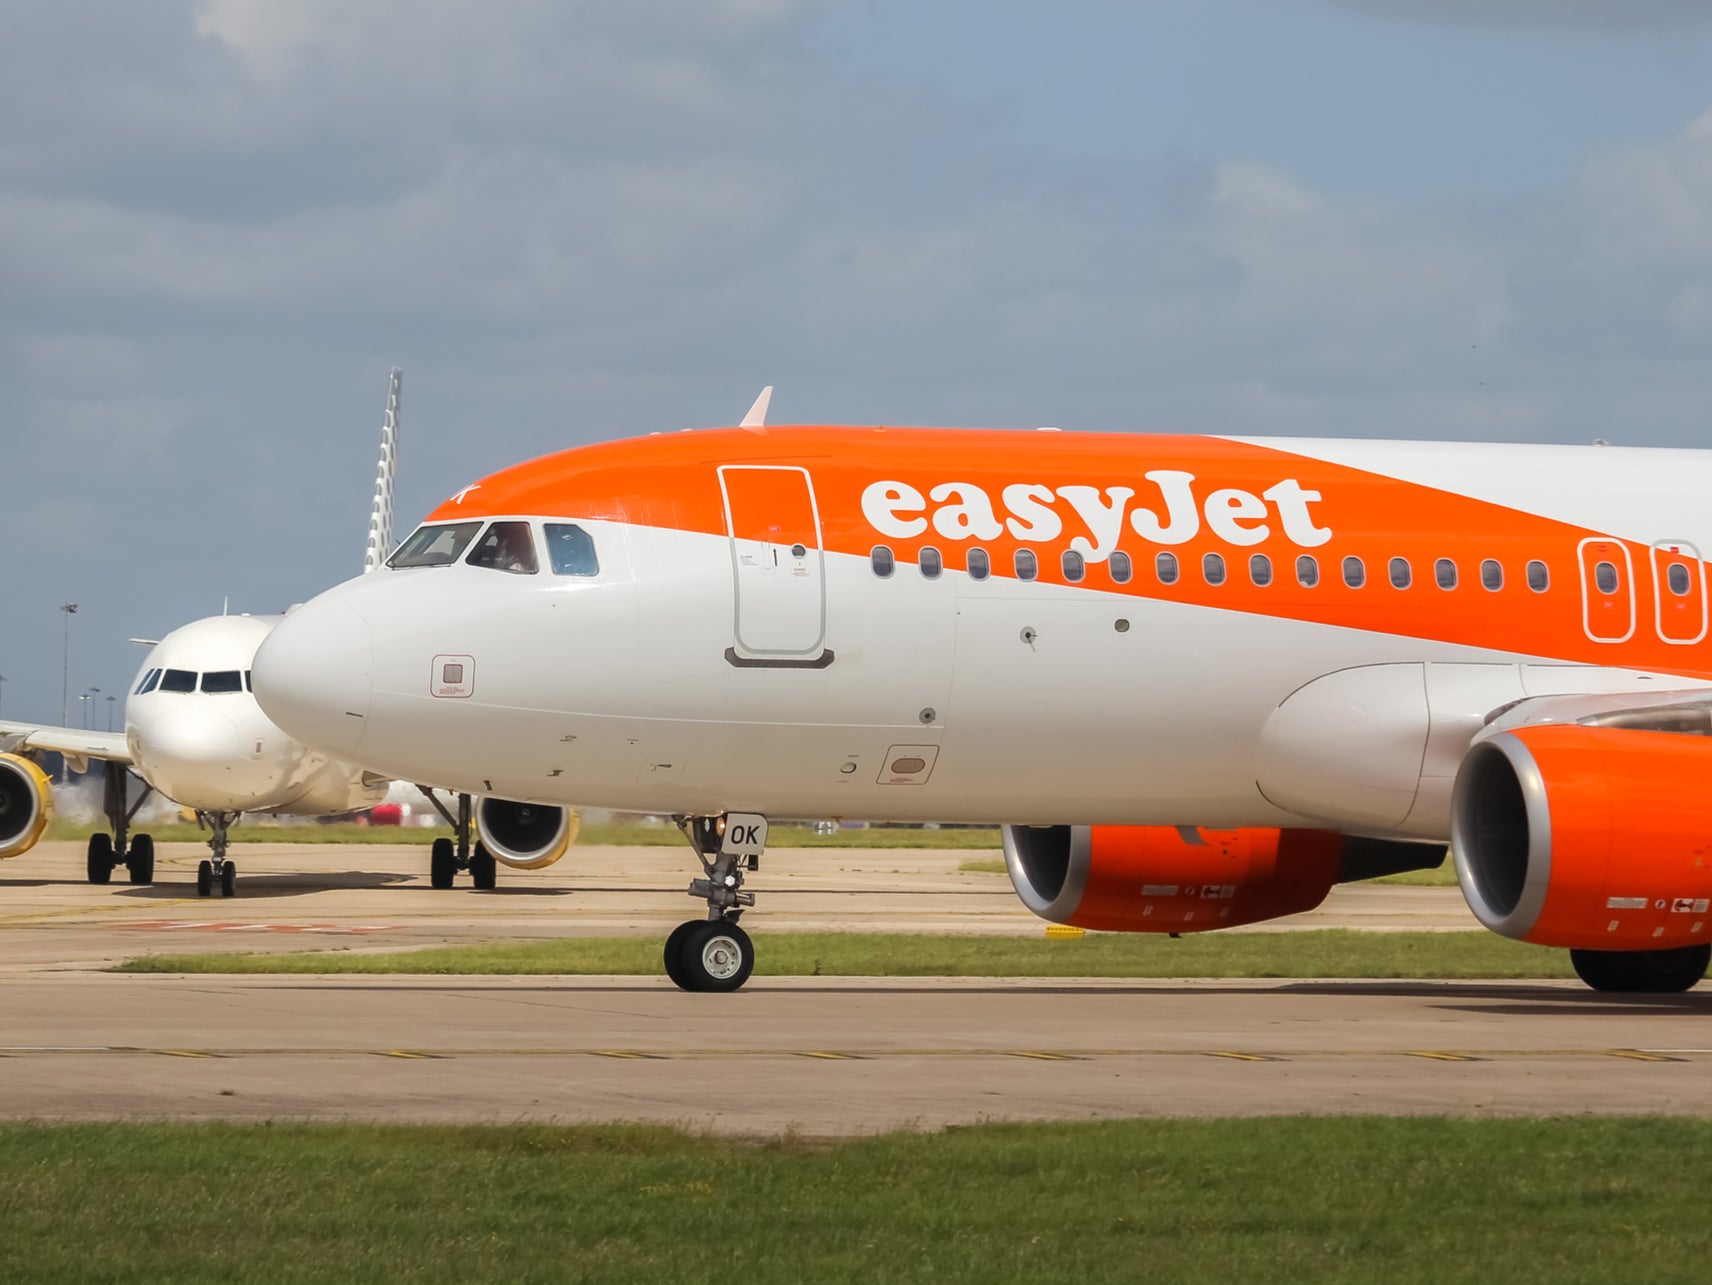 Back to base: Technical issues meant the easyJet flight didn’t make it to Spain